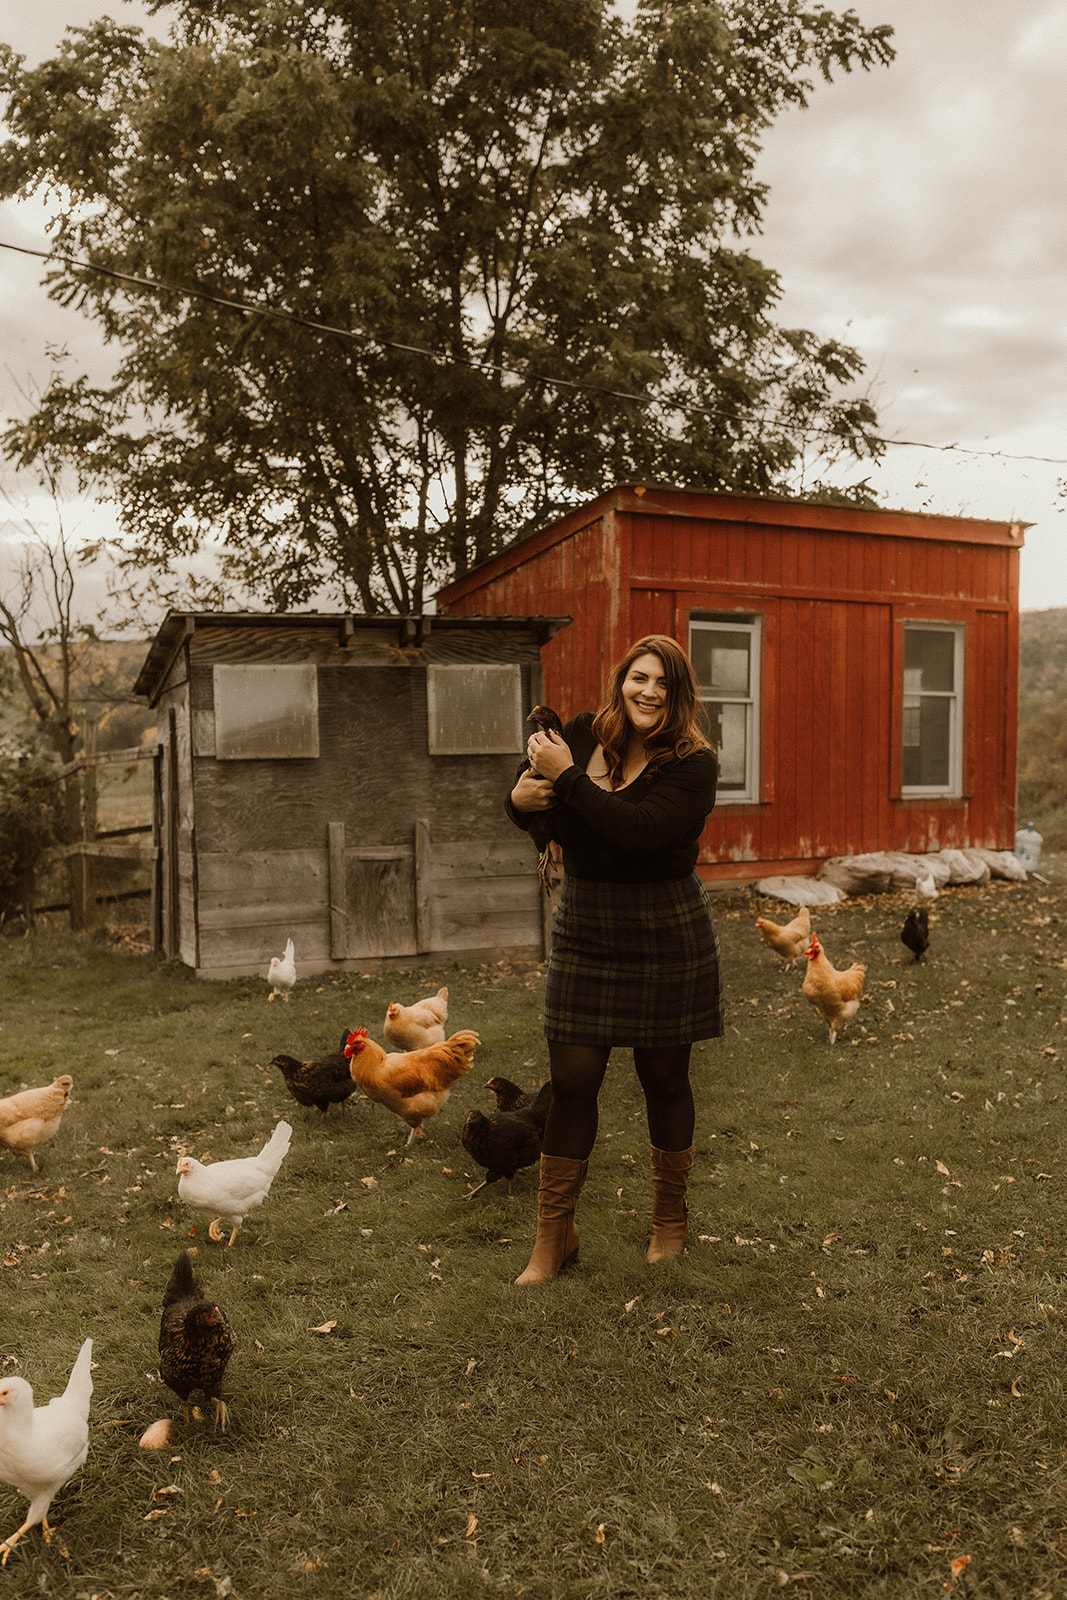 Future bride poses with her chickens during upstate New York farm engagement